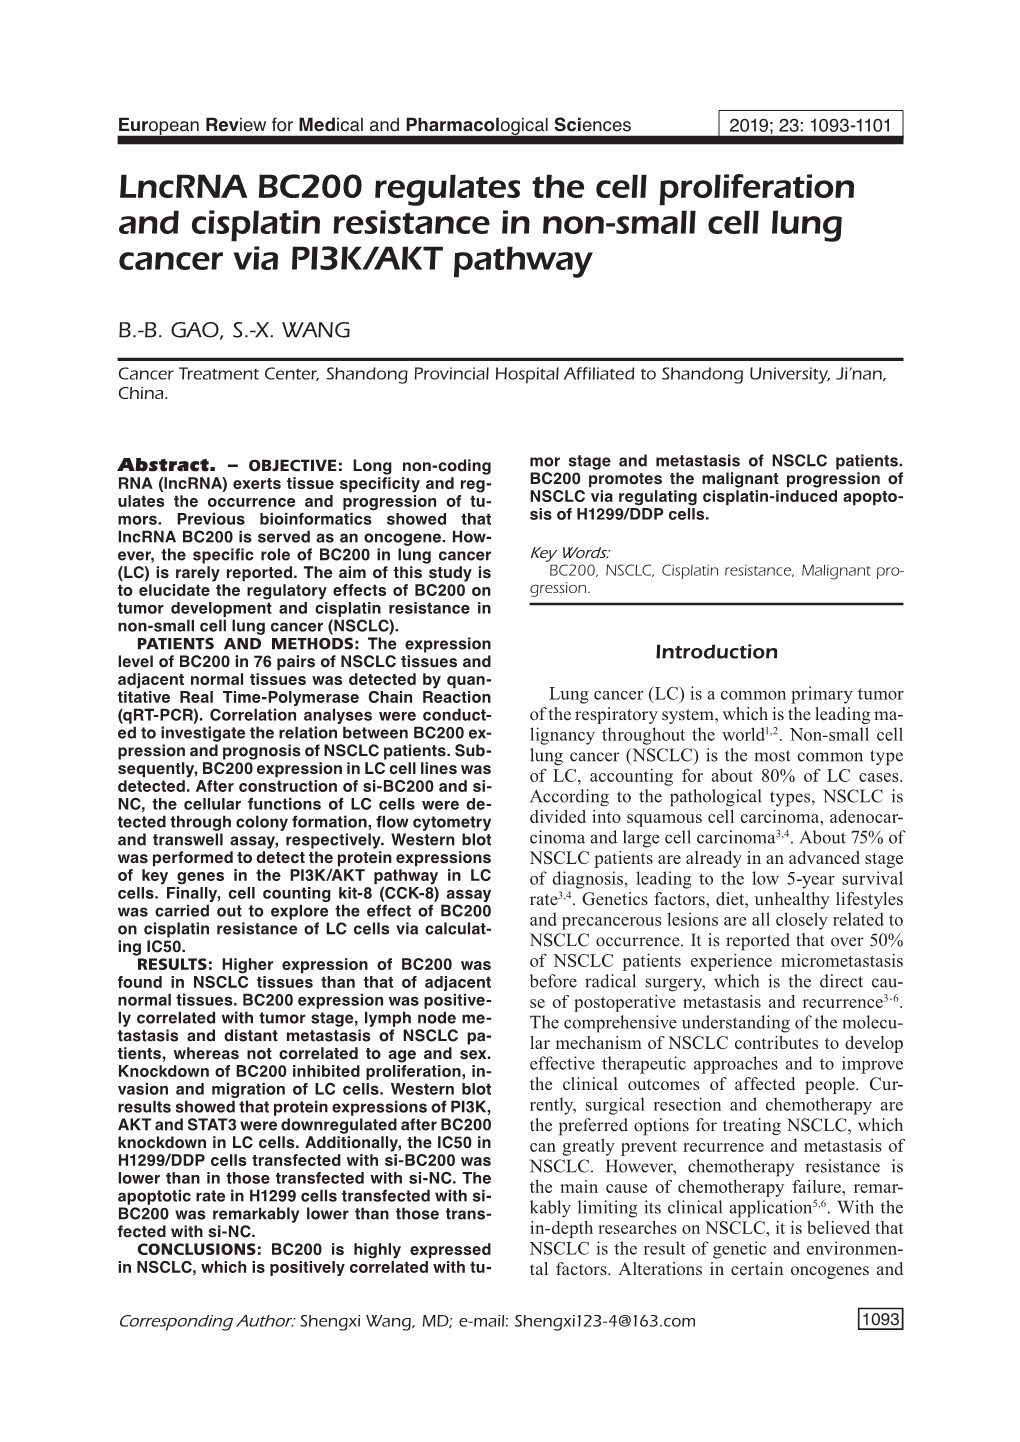 Lncrna BC200 Regulates the Cell Proliferation and Cisplatin Resistance in Non-Small Cell Lung Cancer Via PI3K/AKT Pathway